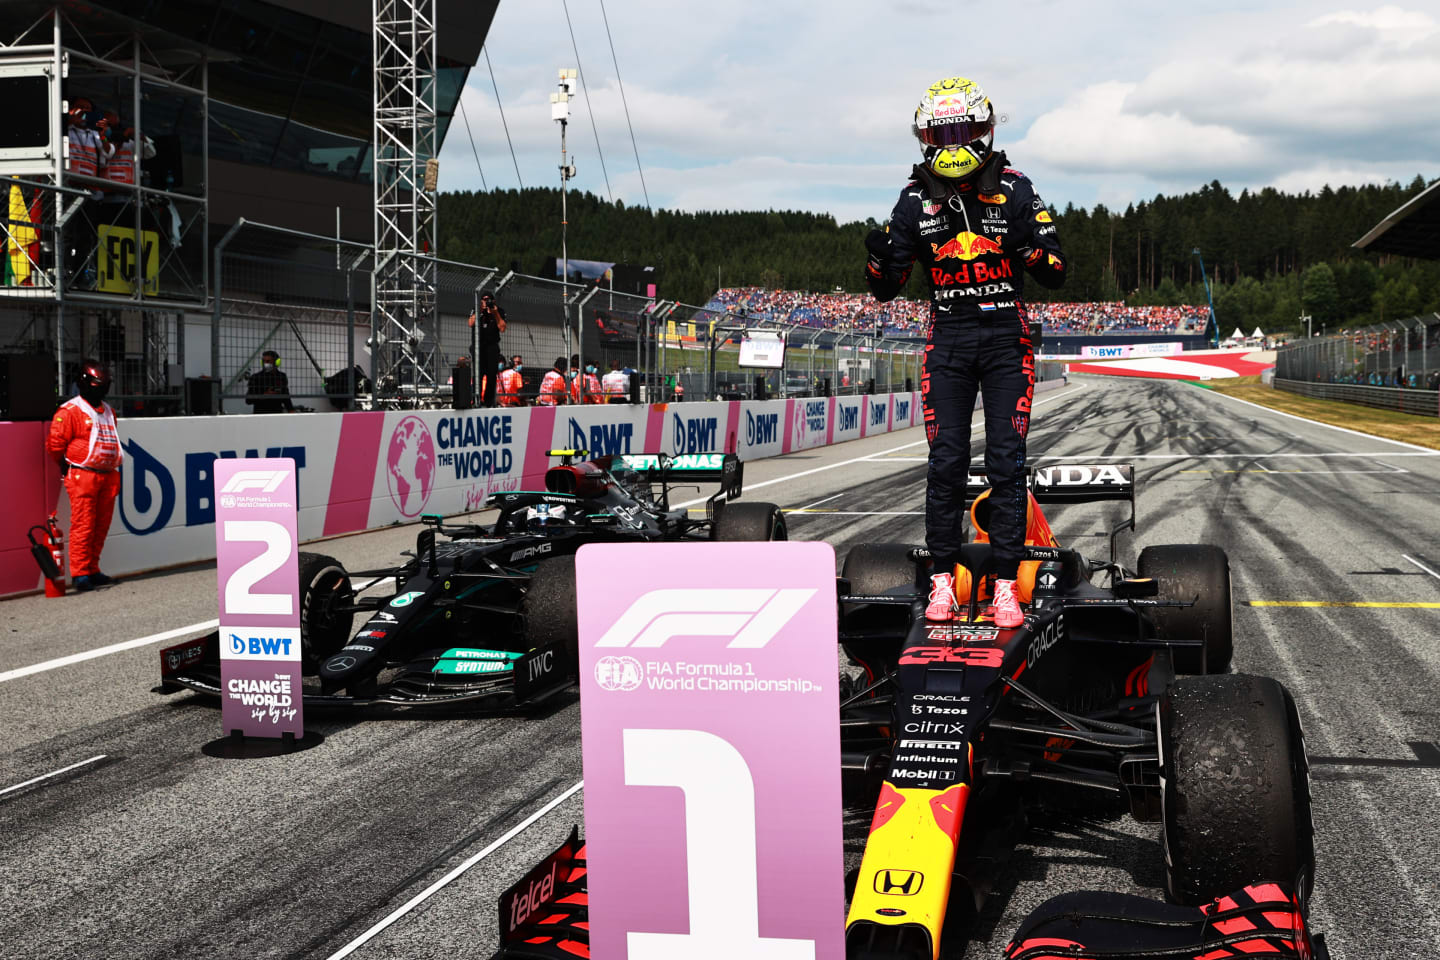 SPIELBERG, AUSTRIA - JULY 04: Race winner Max Verstappen of Netherlands and Red Bull Racing celebrates in parc ferme during the F1 Grand Prix of Austria at Red Bull Ring on July 04, 2021 in Spielberg, Austria. (Photo by Mark Thompson/Getty Images)